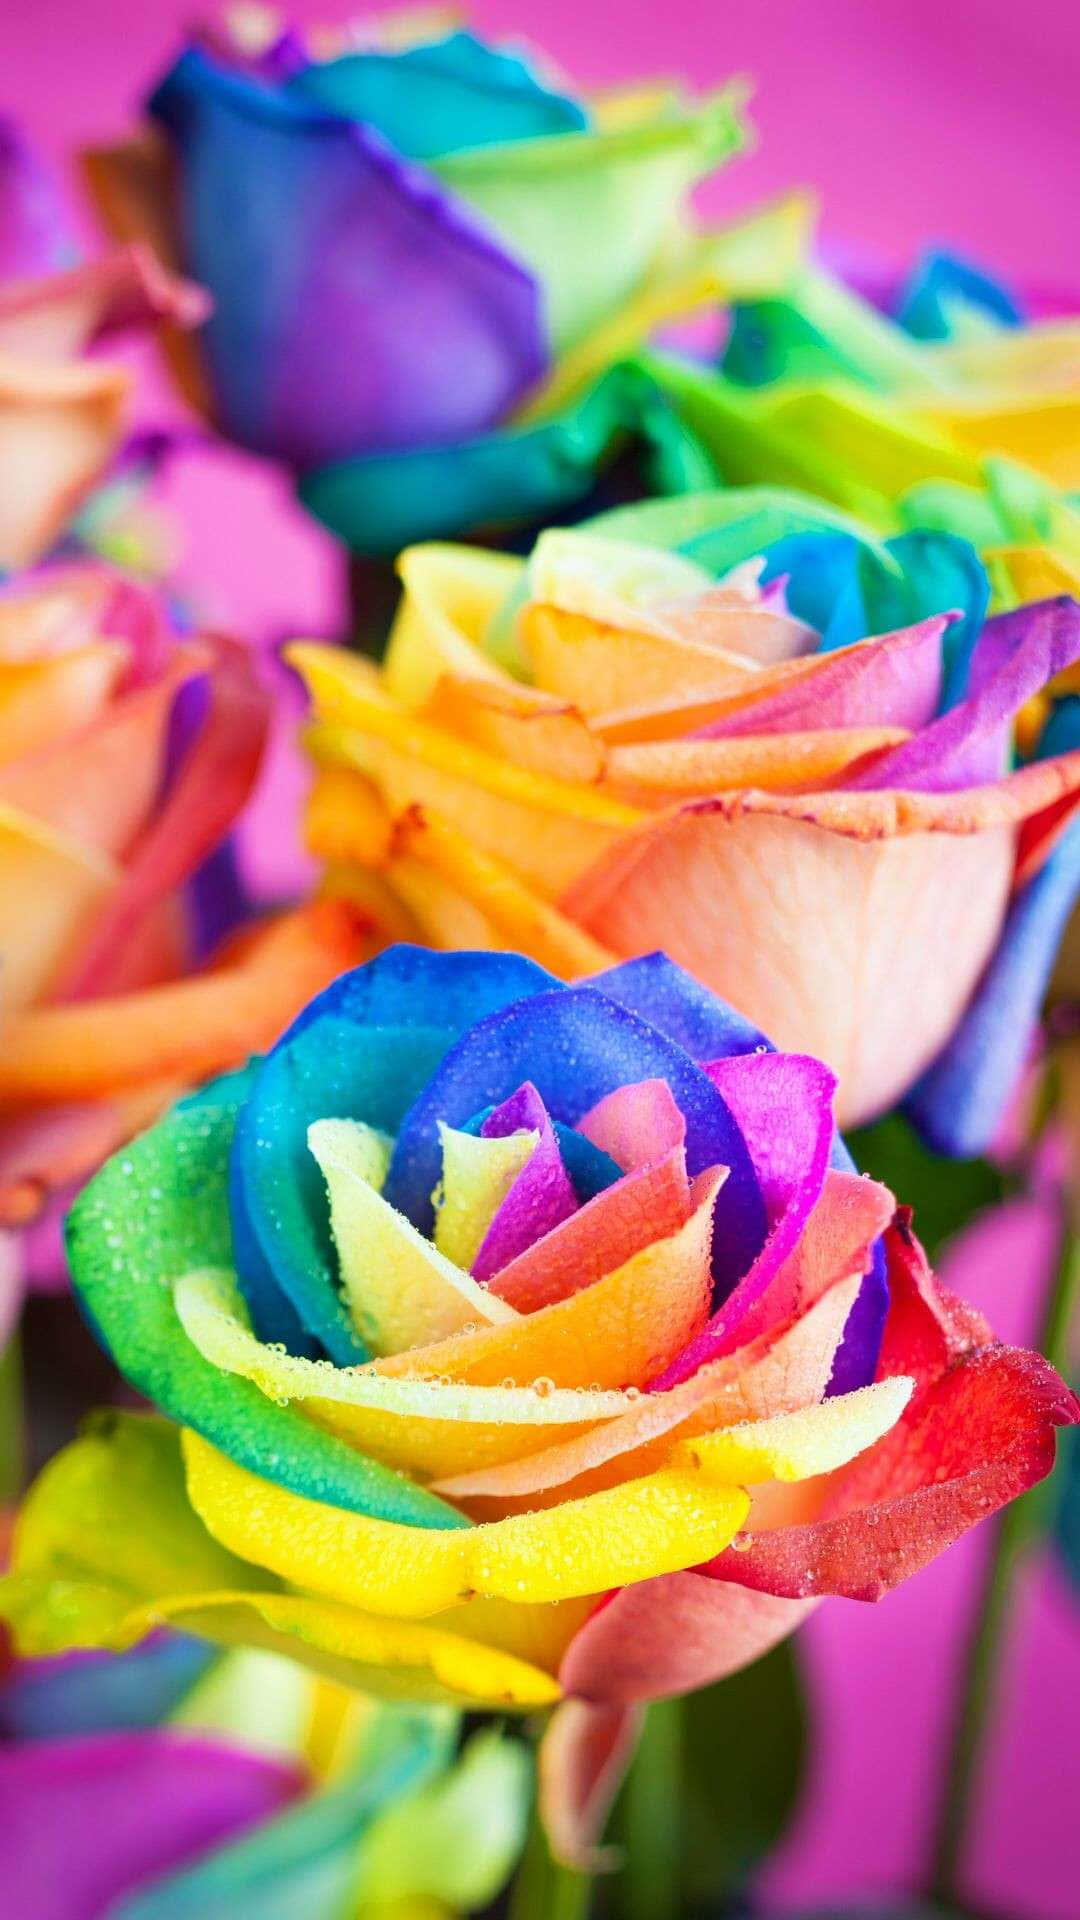 Add a splash of vibrant color to your phone with this Rainbow Flower iPhone wallpaper Wallpaper